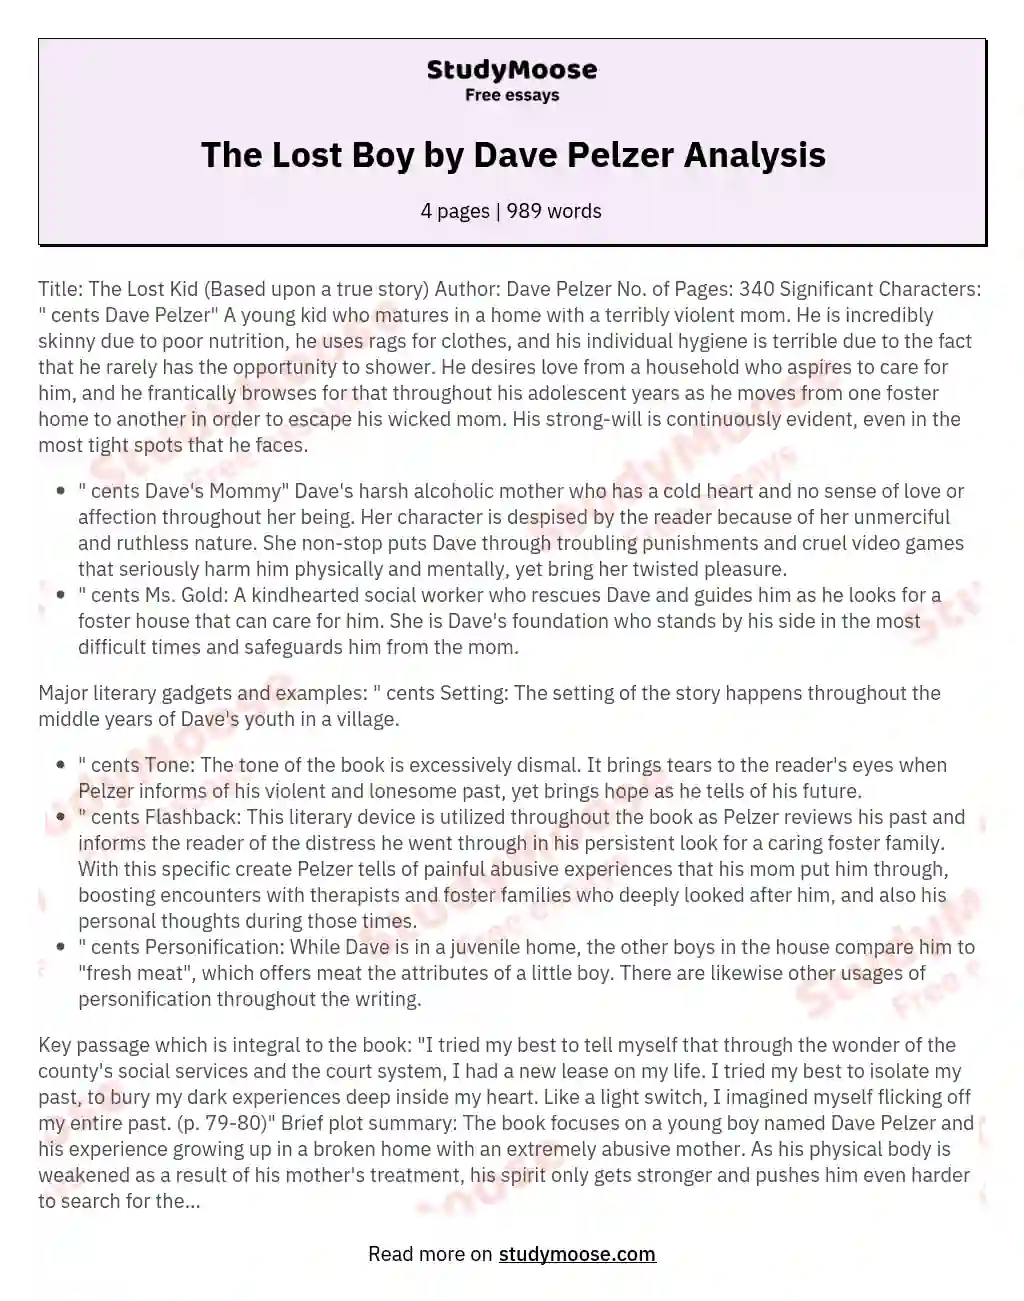 The Lost Boy by Dave Pelzer Analysis essay